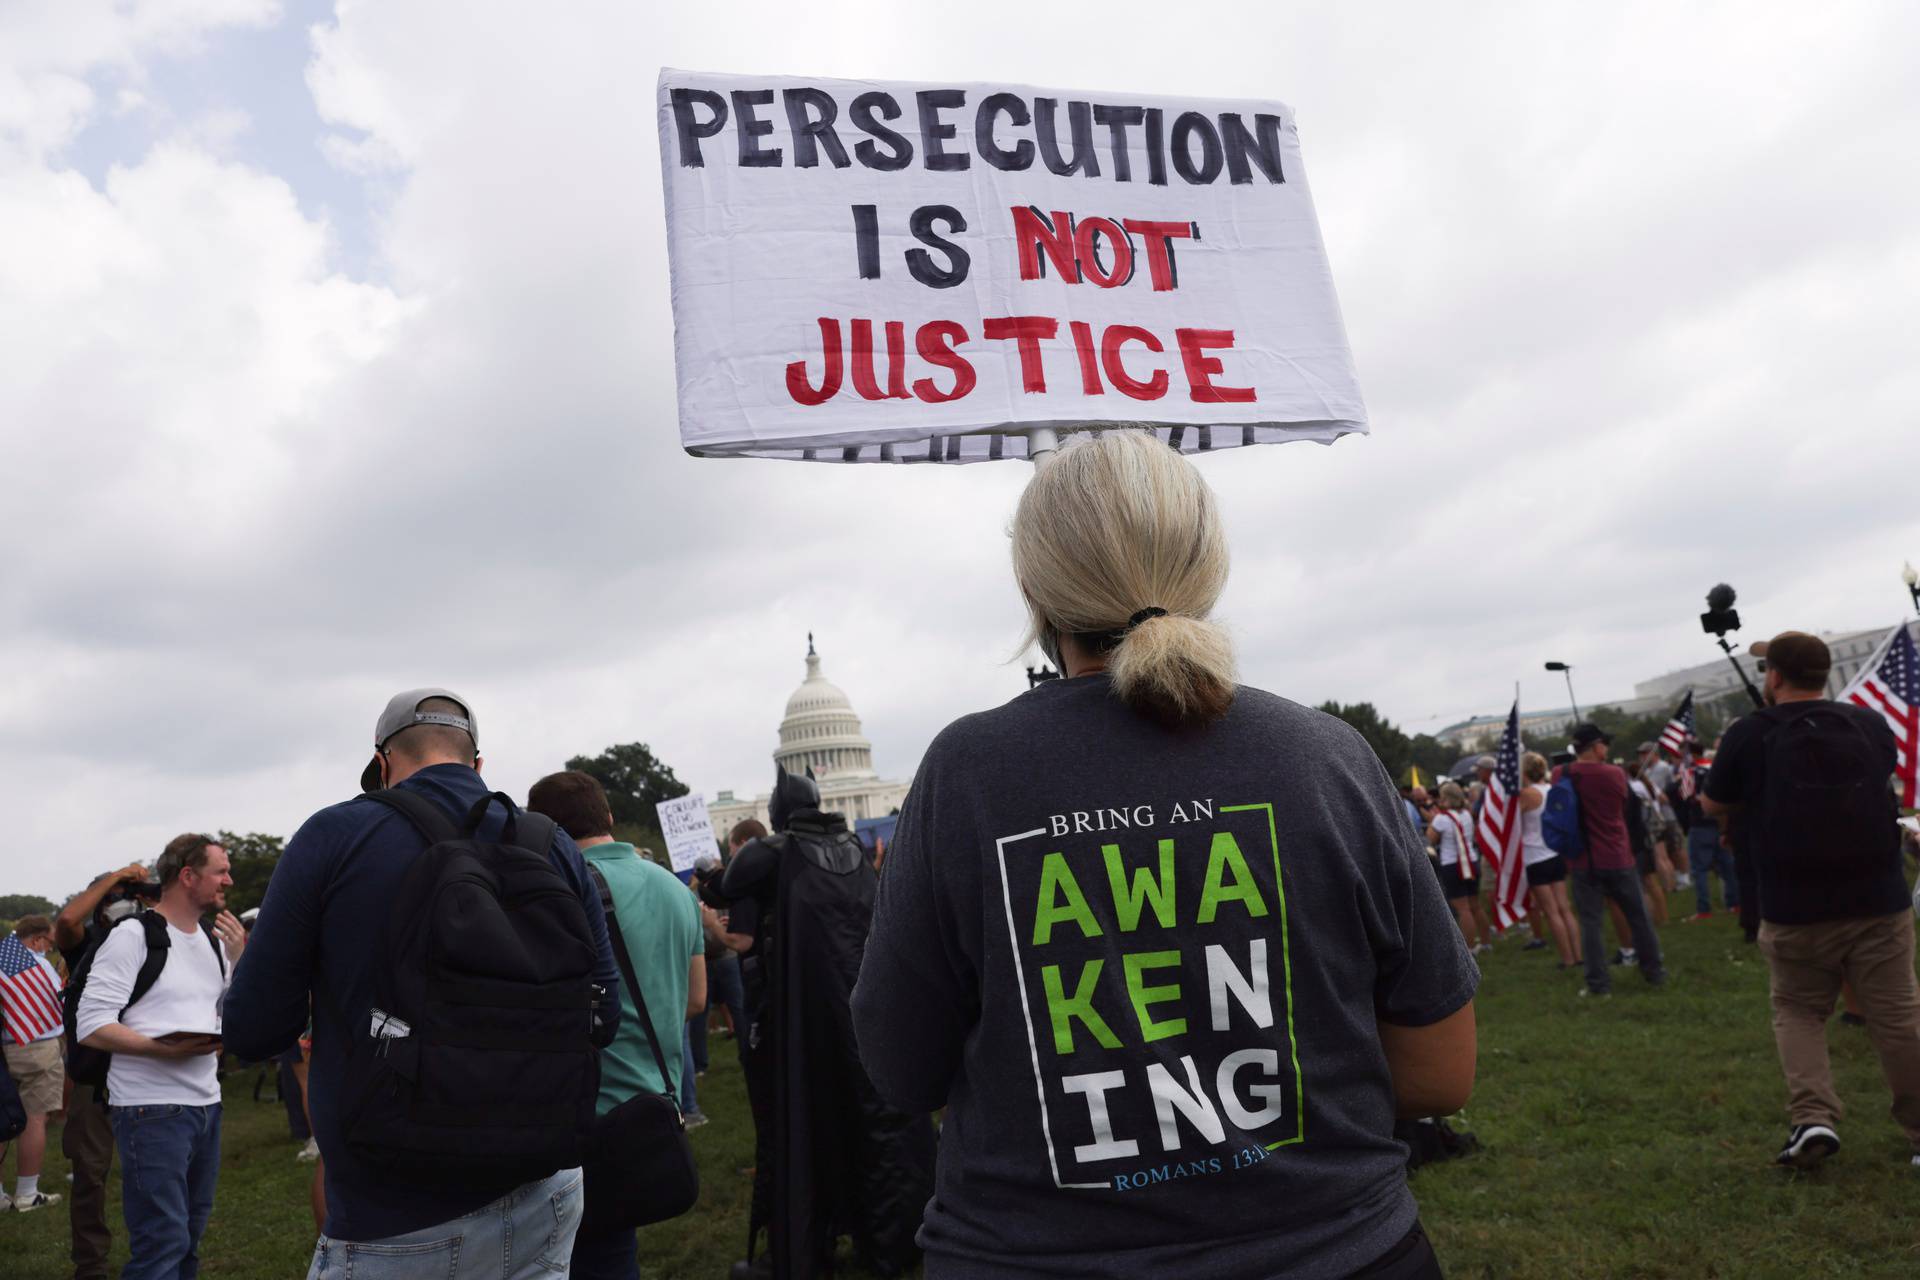 Demonstrators rally in support of January 6 defendants at protest near the U.S. Capitol in Washington